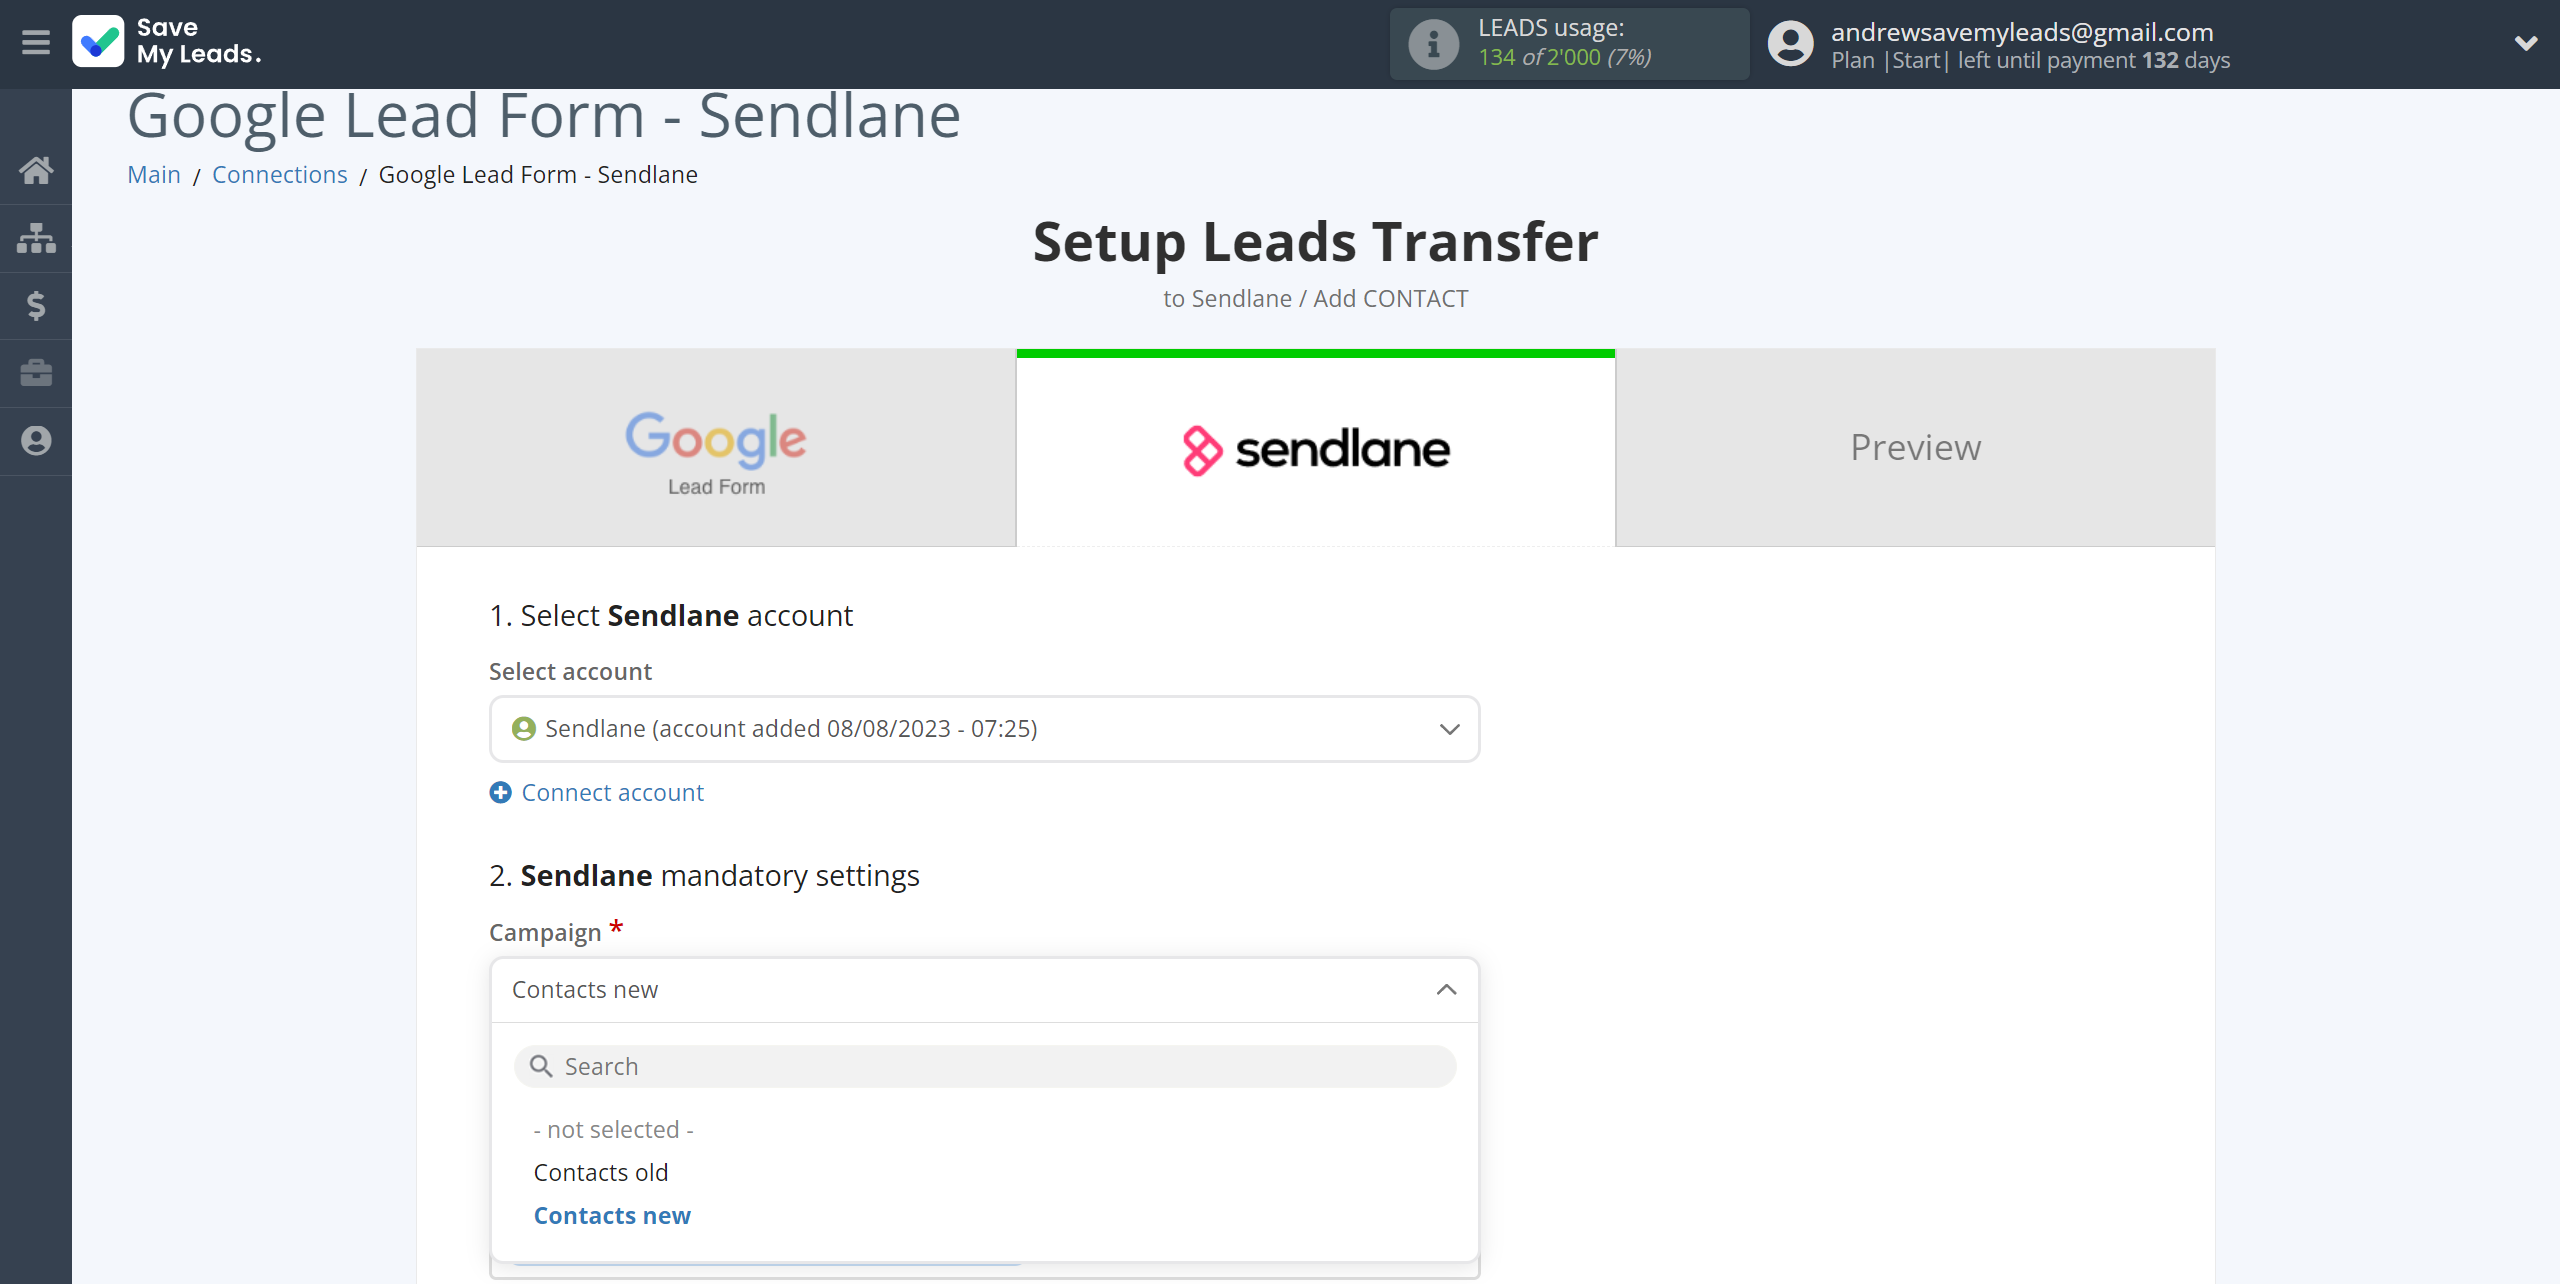 How to Connect Google Lead Form with Sendlane Add Contacts | Assigning fields